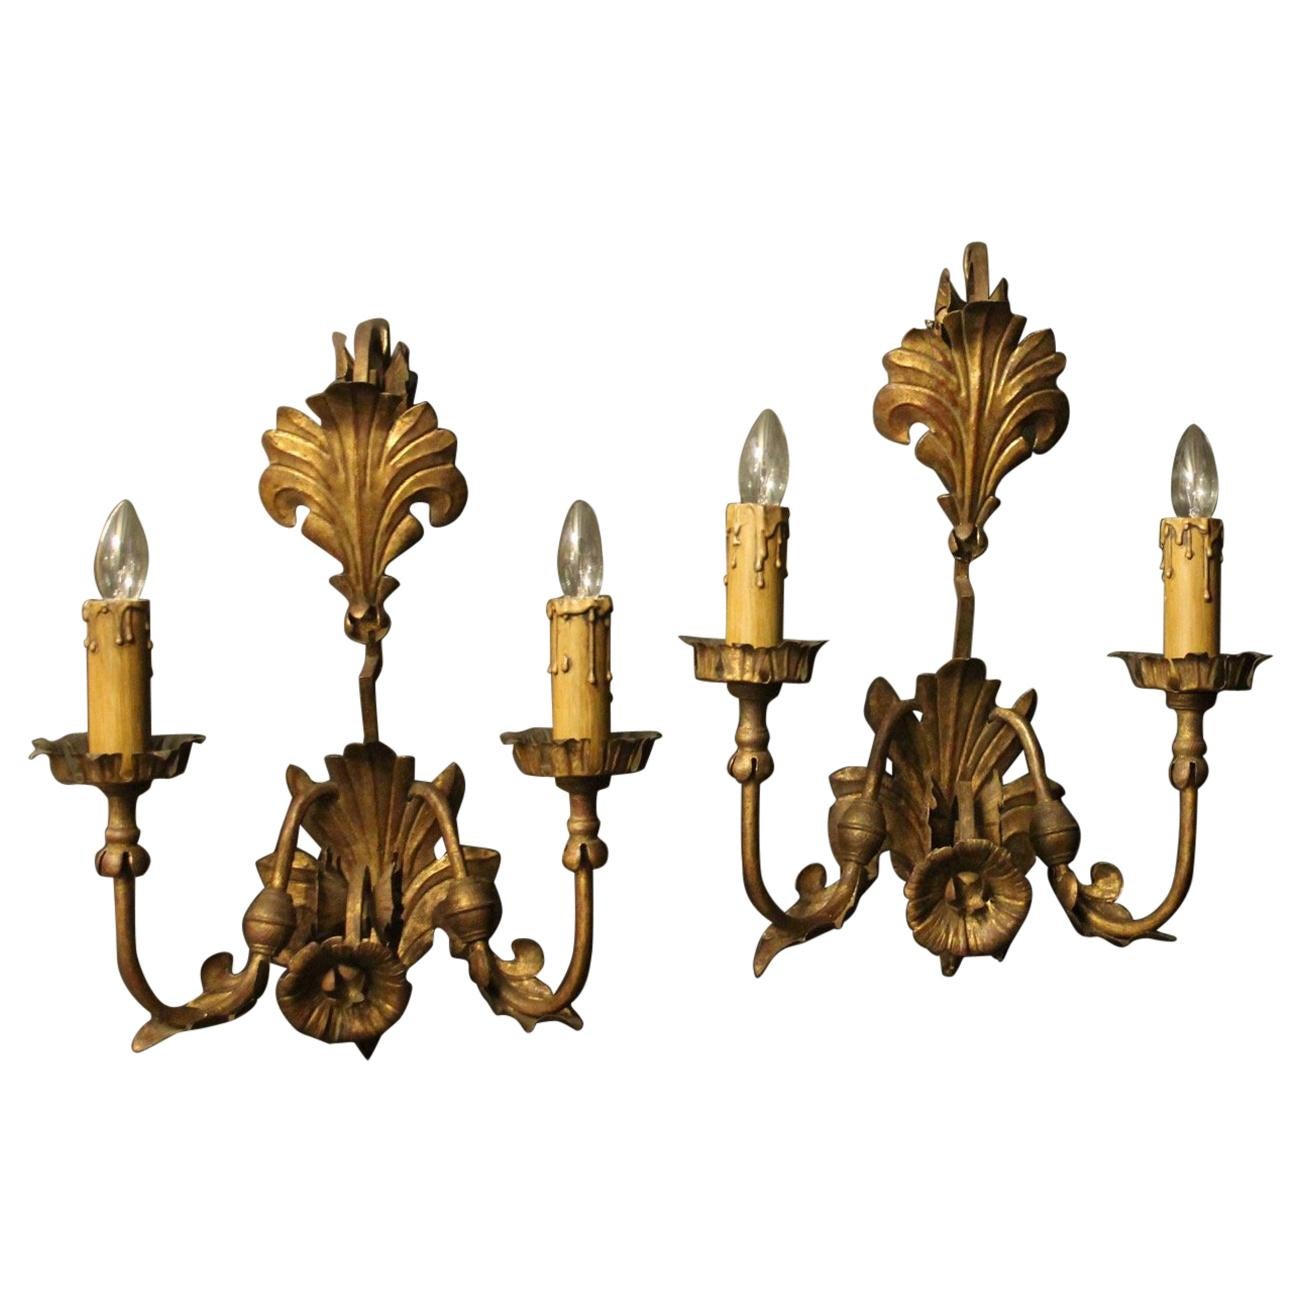 Florentine Pair of Gilded Leaf Twin Arm Antique Wall Lights